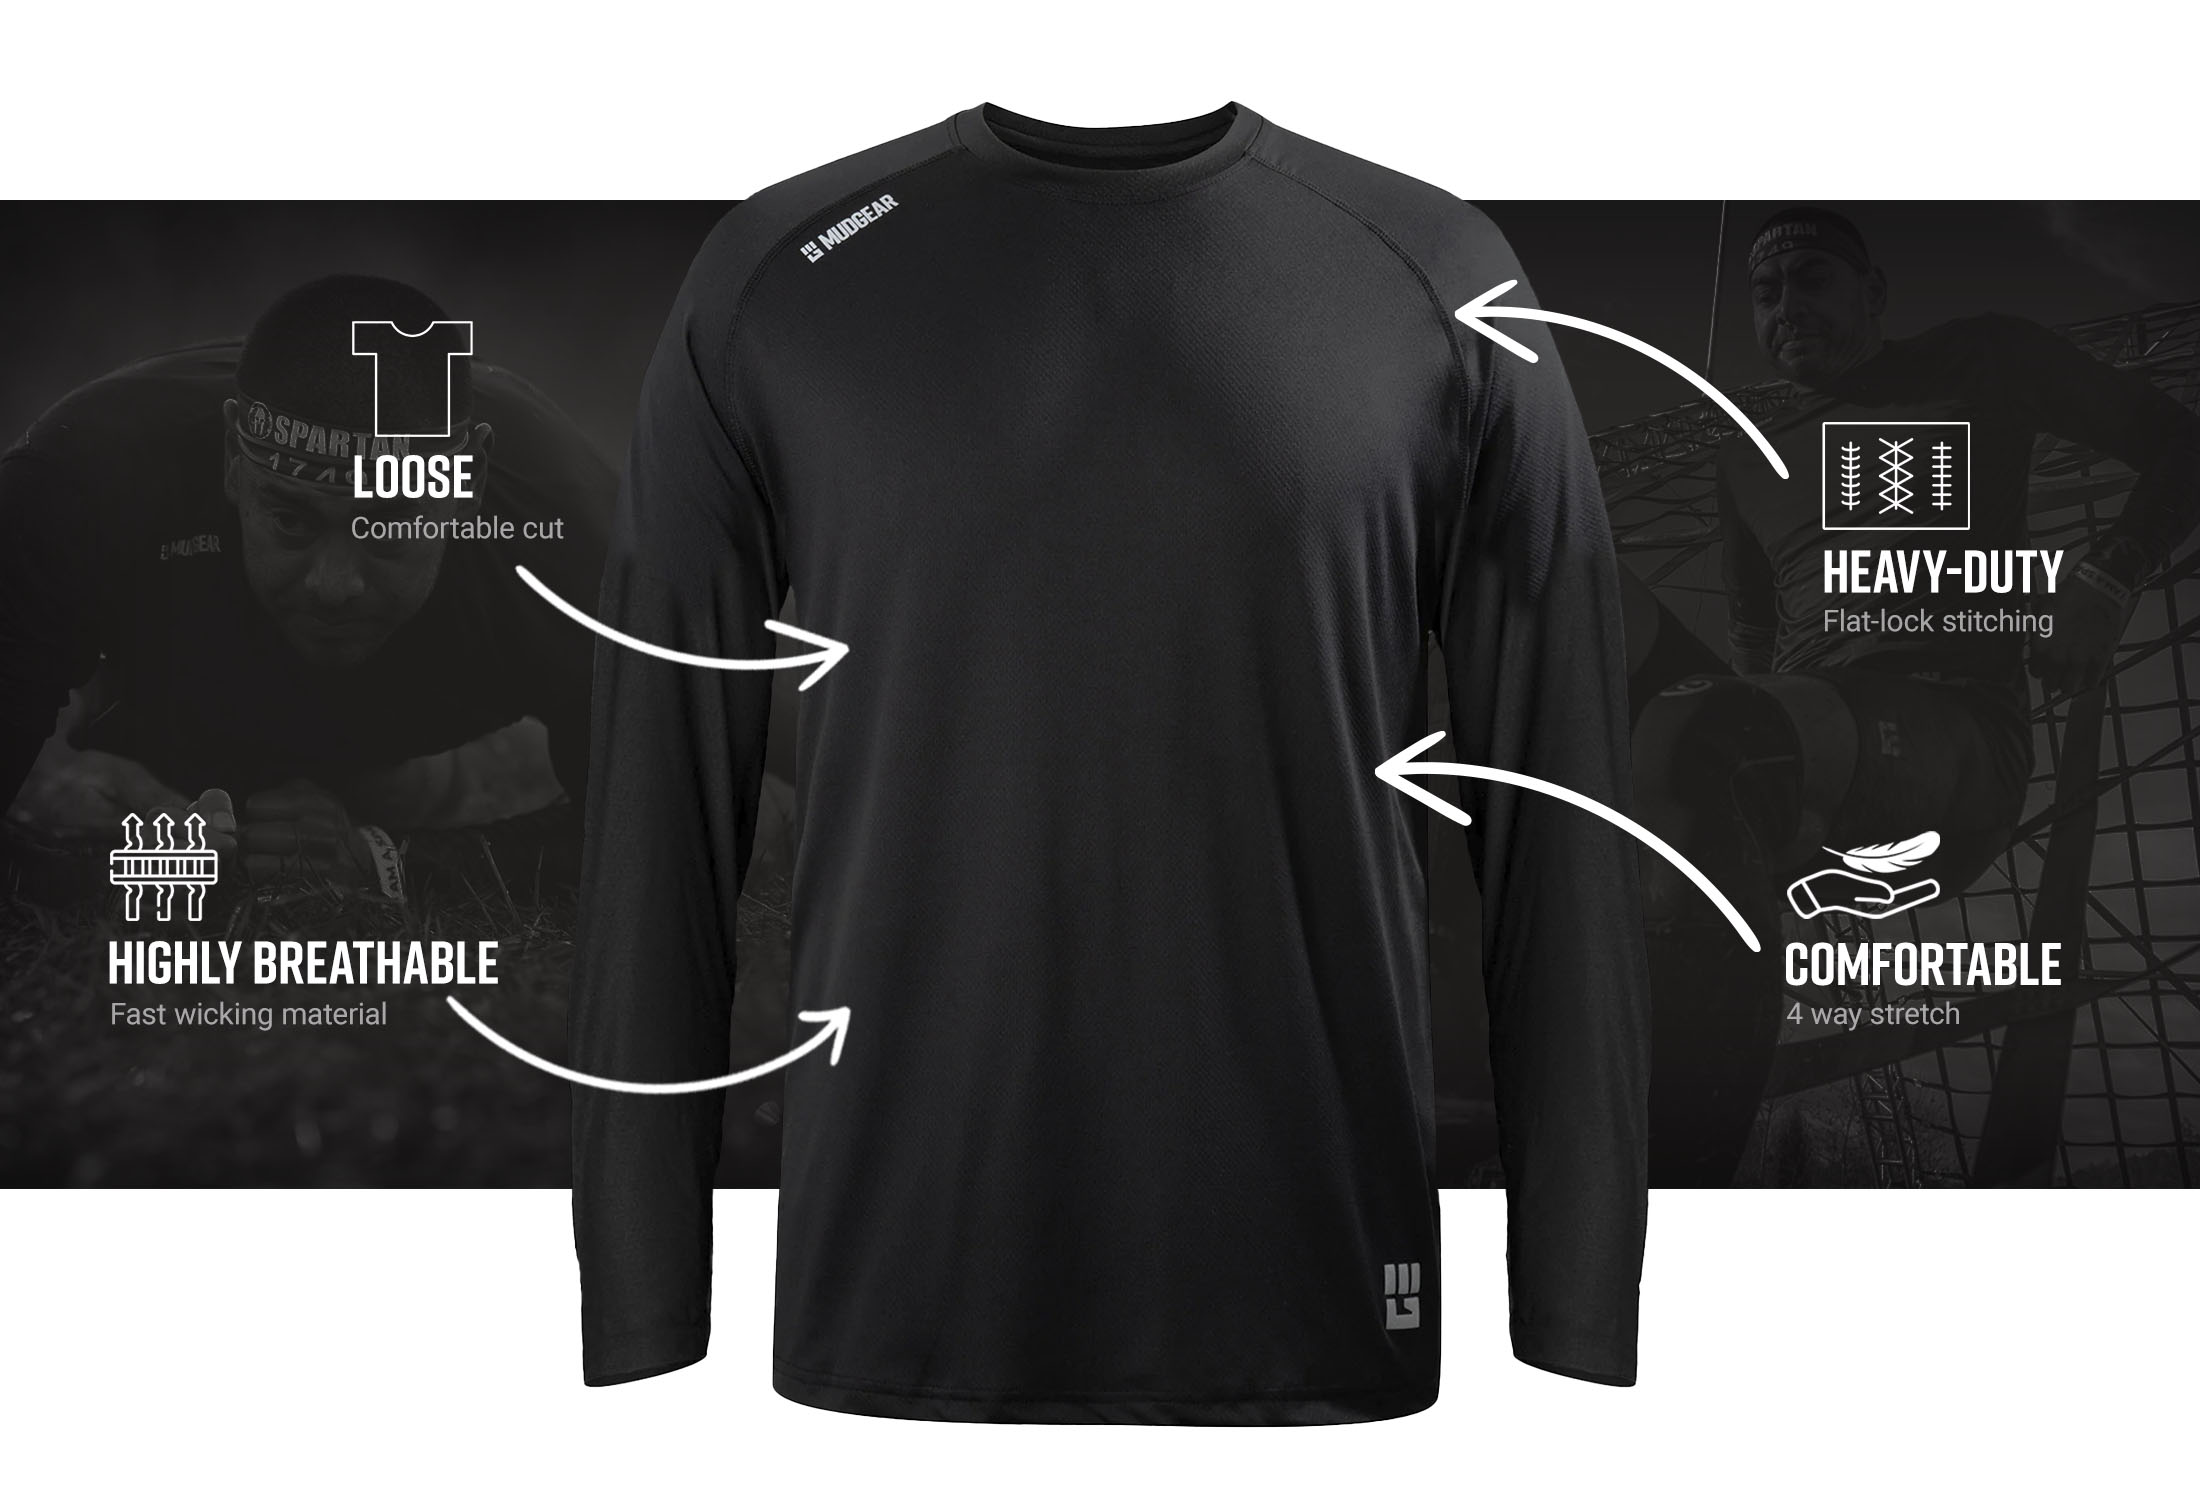 Infographic of Men's Loose Fit Performance Shirt VX - Long Sleeve (Black)